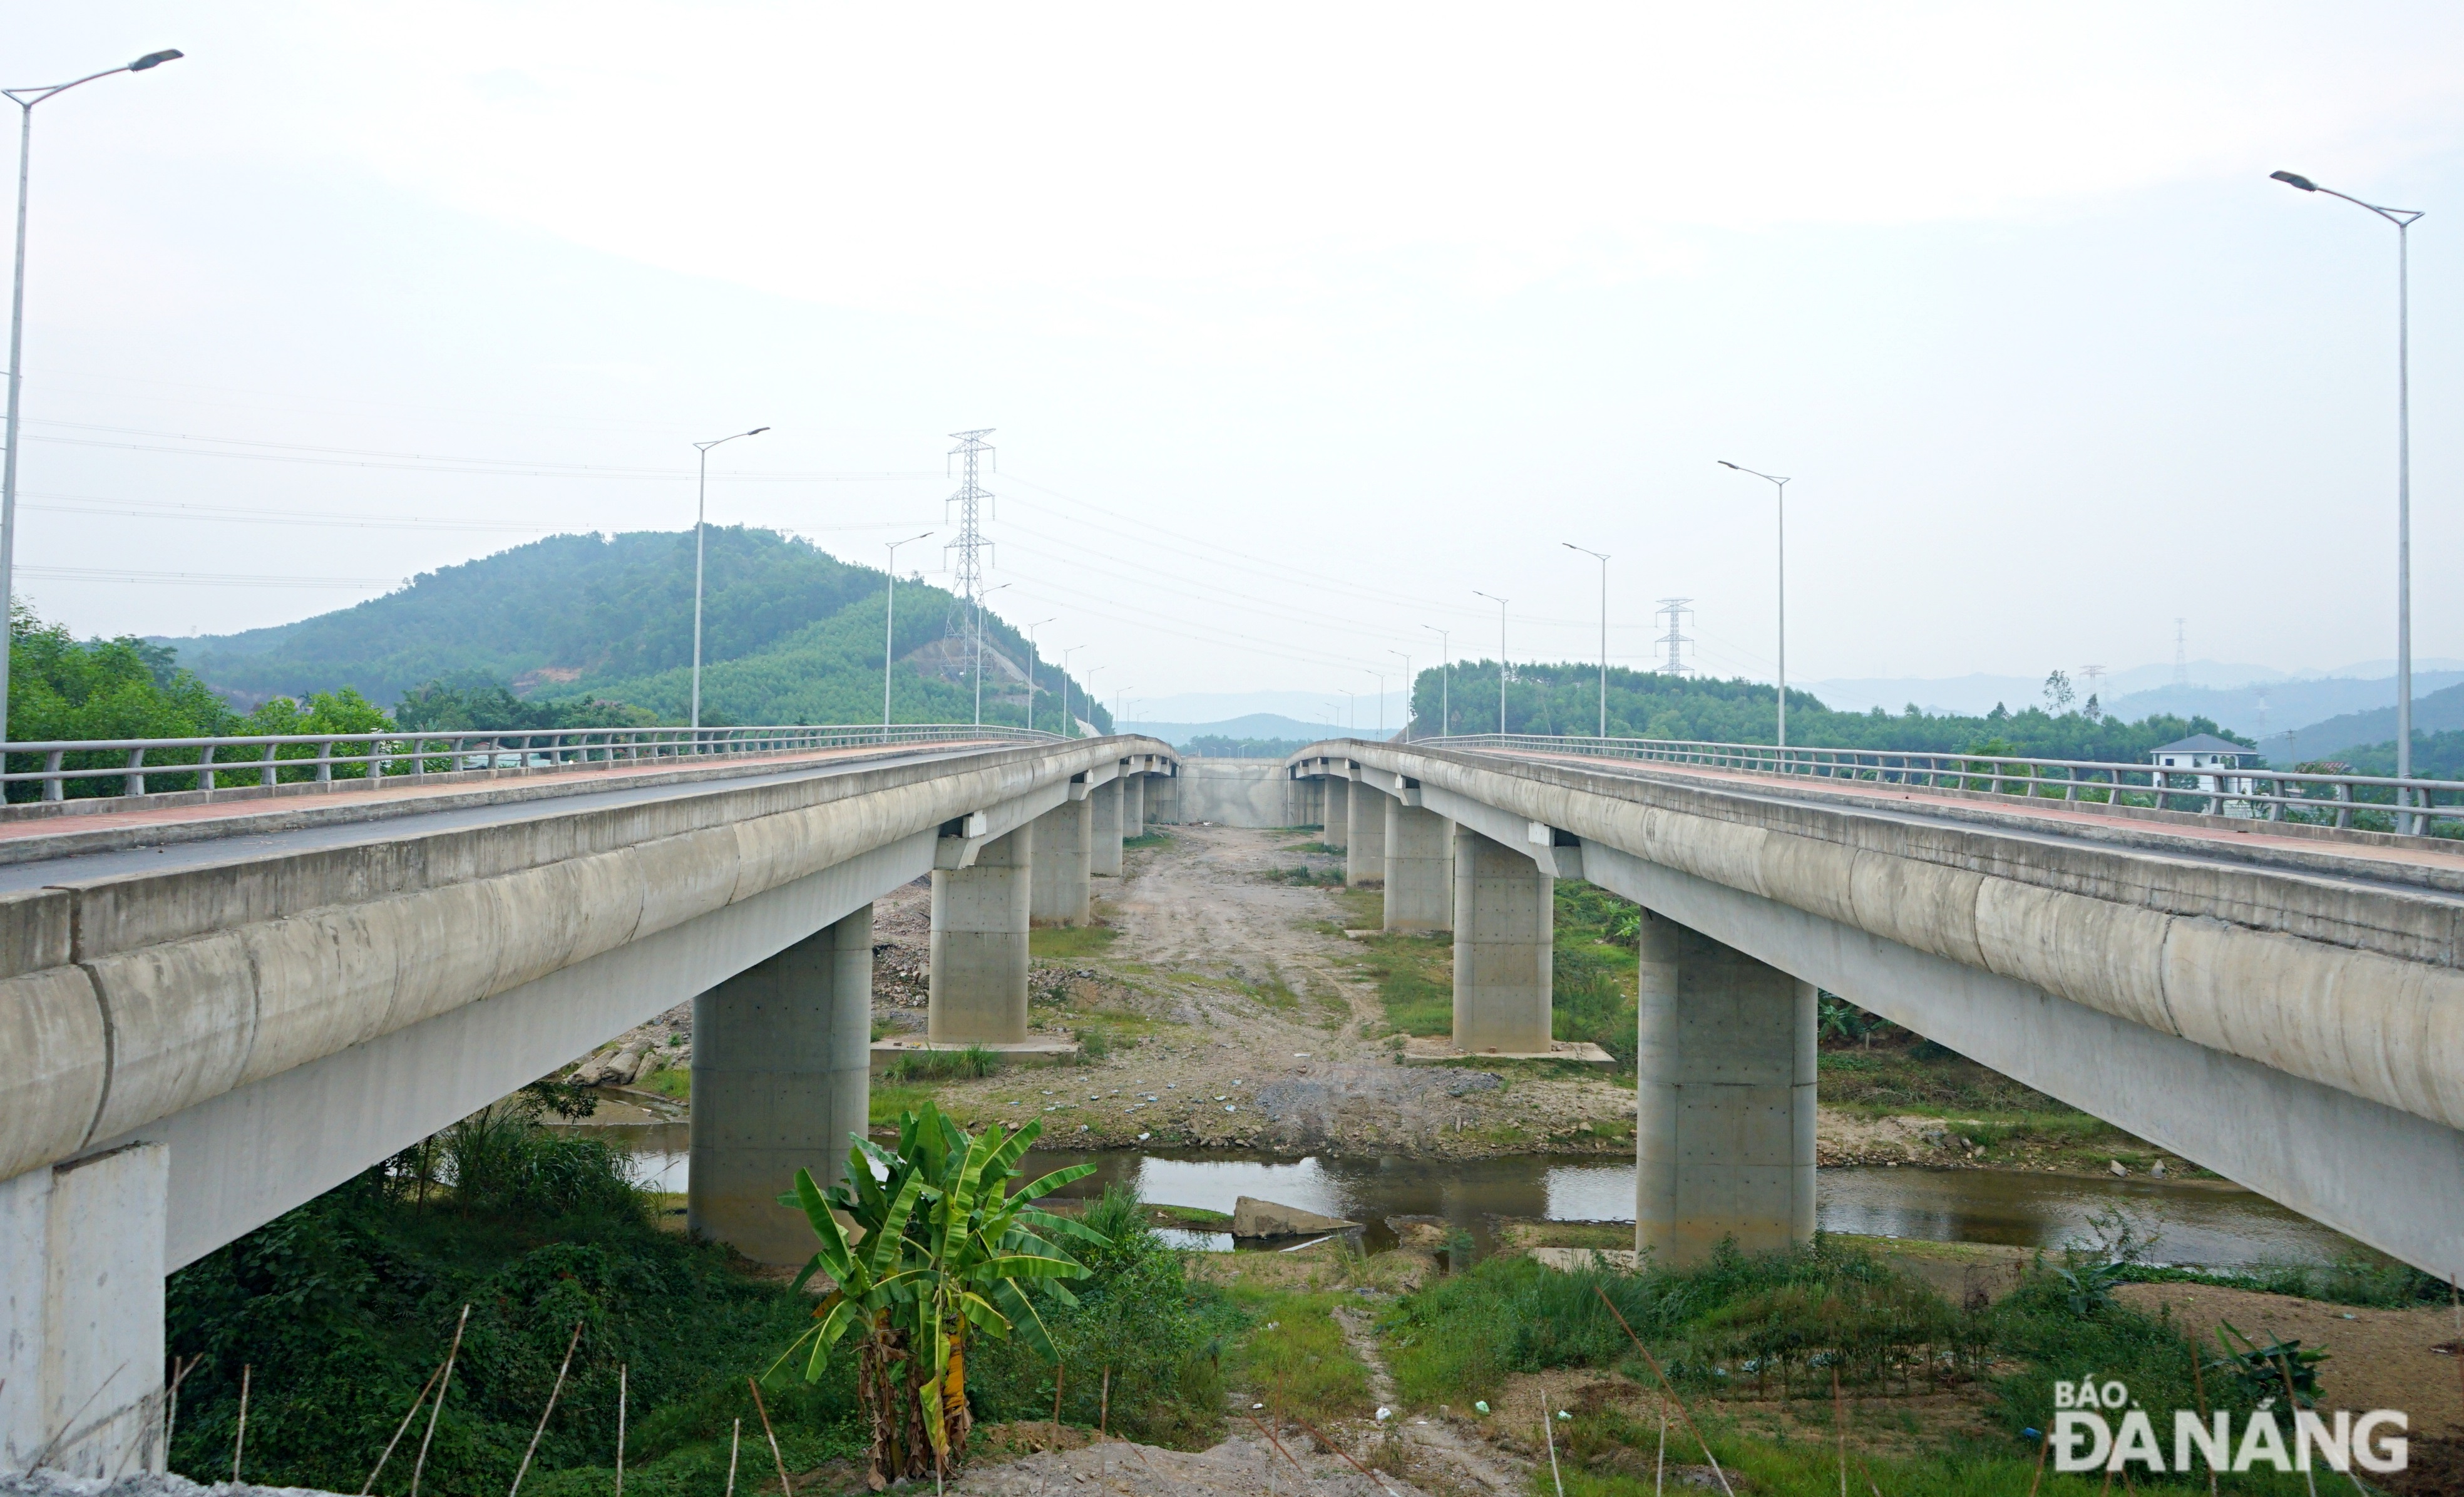 The construction of Lam Vien and Hoi Phuoc bridges, and DT602 overpass has been already completed and opened to traffic.